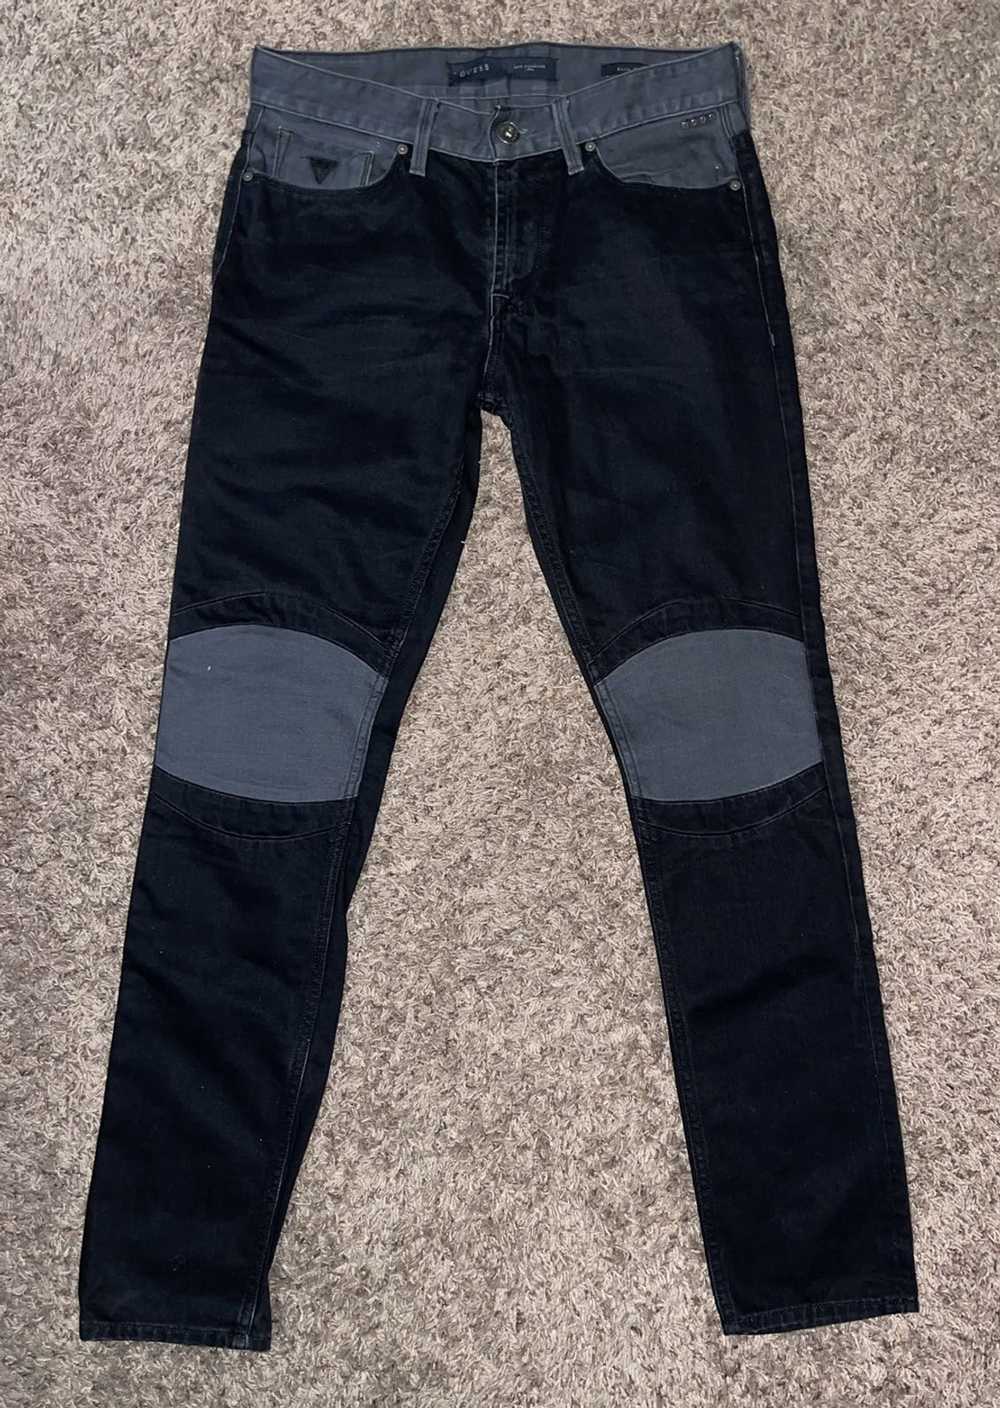 Guess Guess Slim Tapered Jeans - image 1